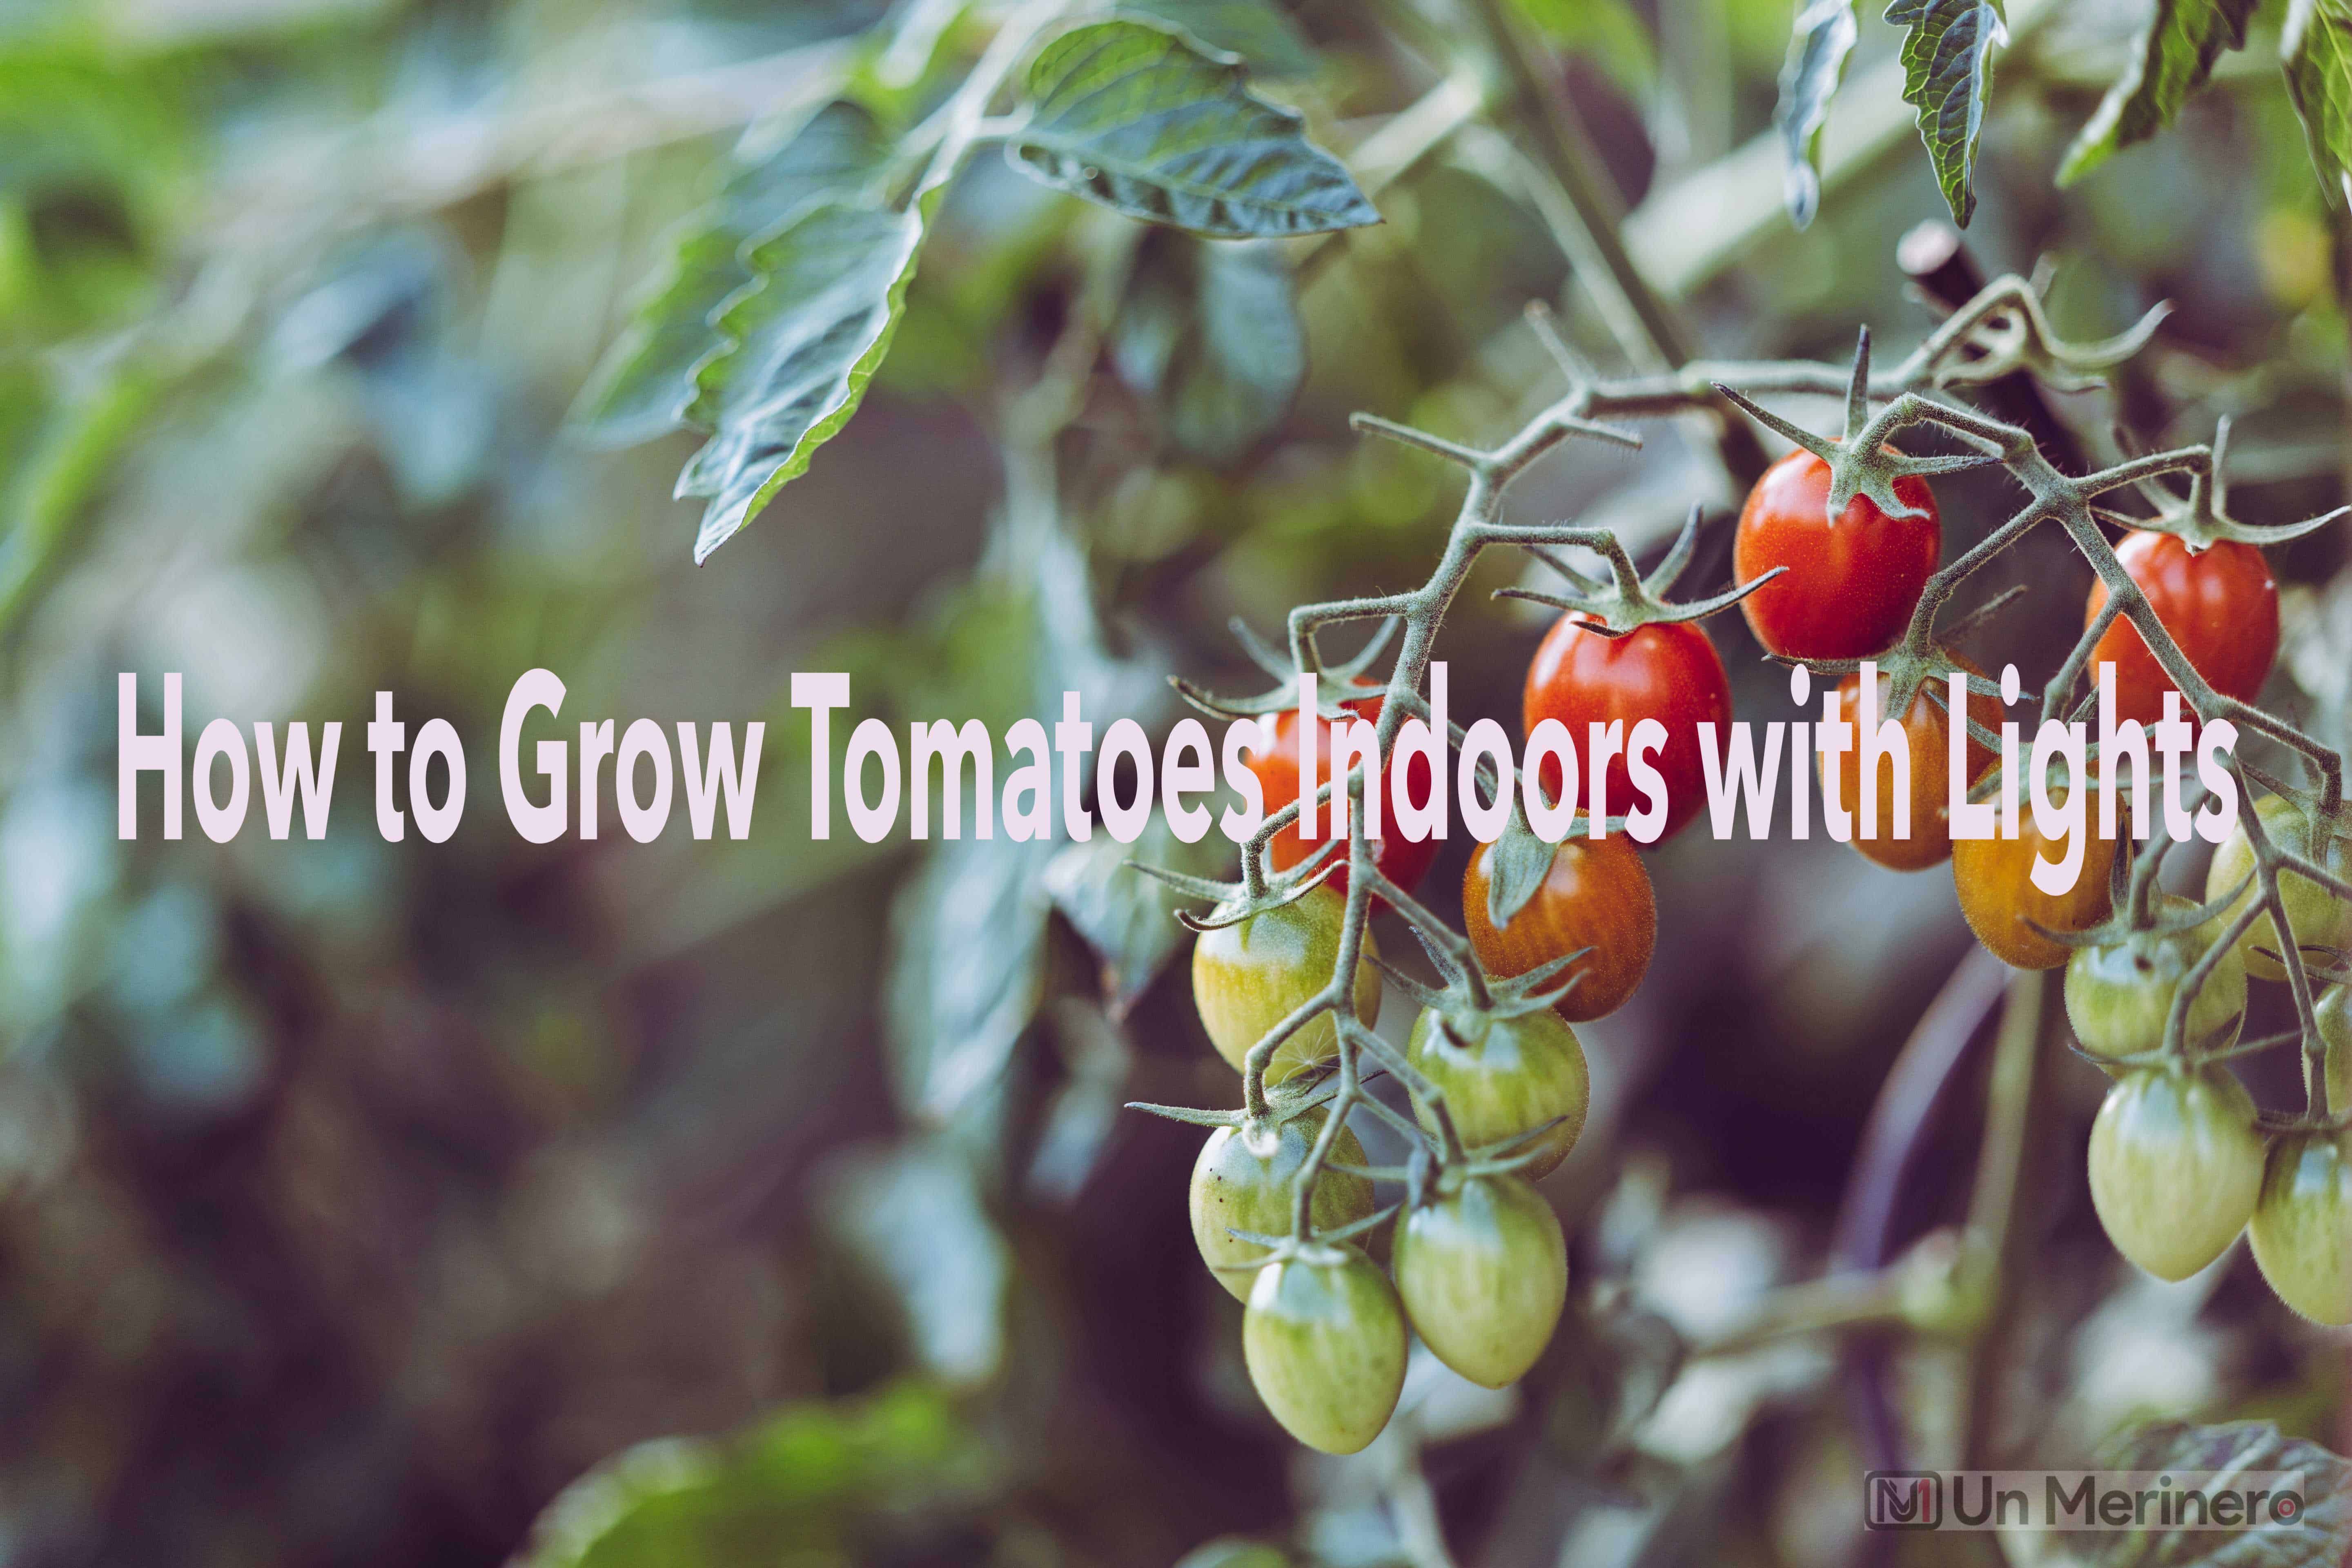 How to Grow Tomatoes Indoors with Lights – 17 Pro Steps